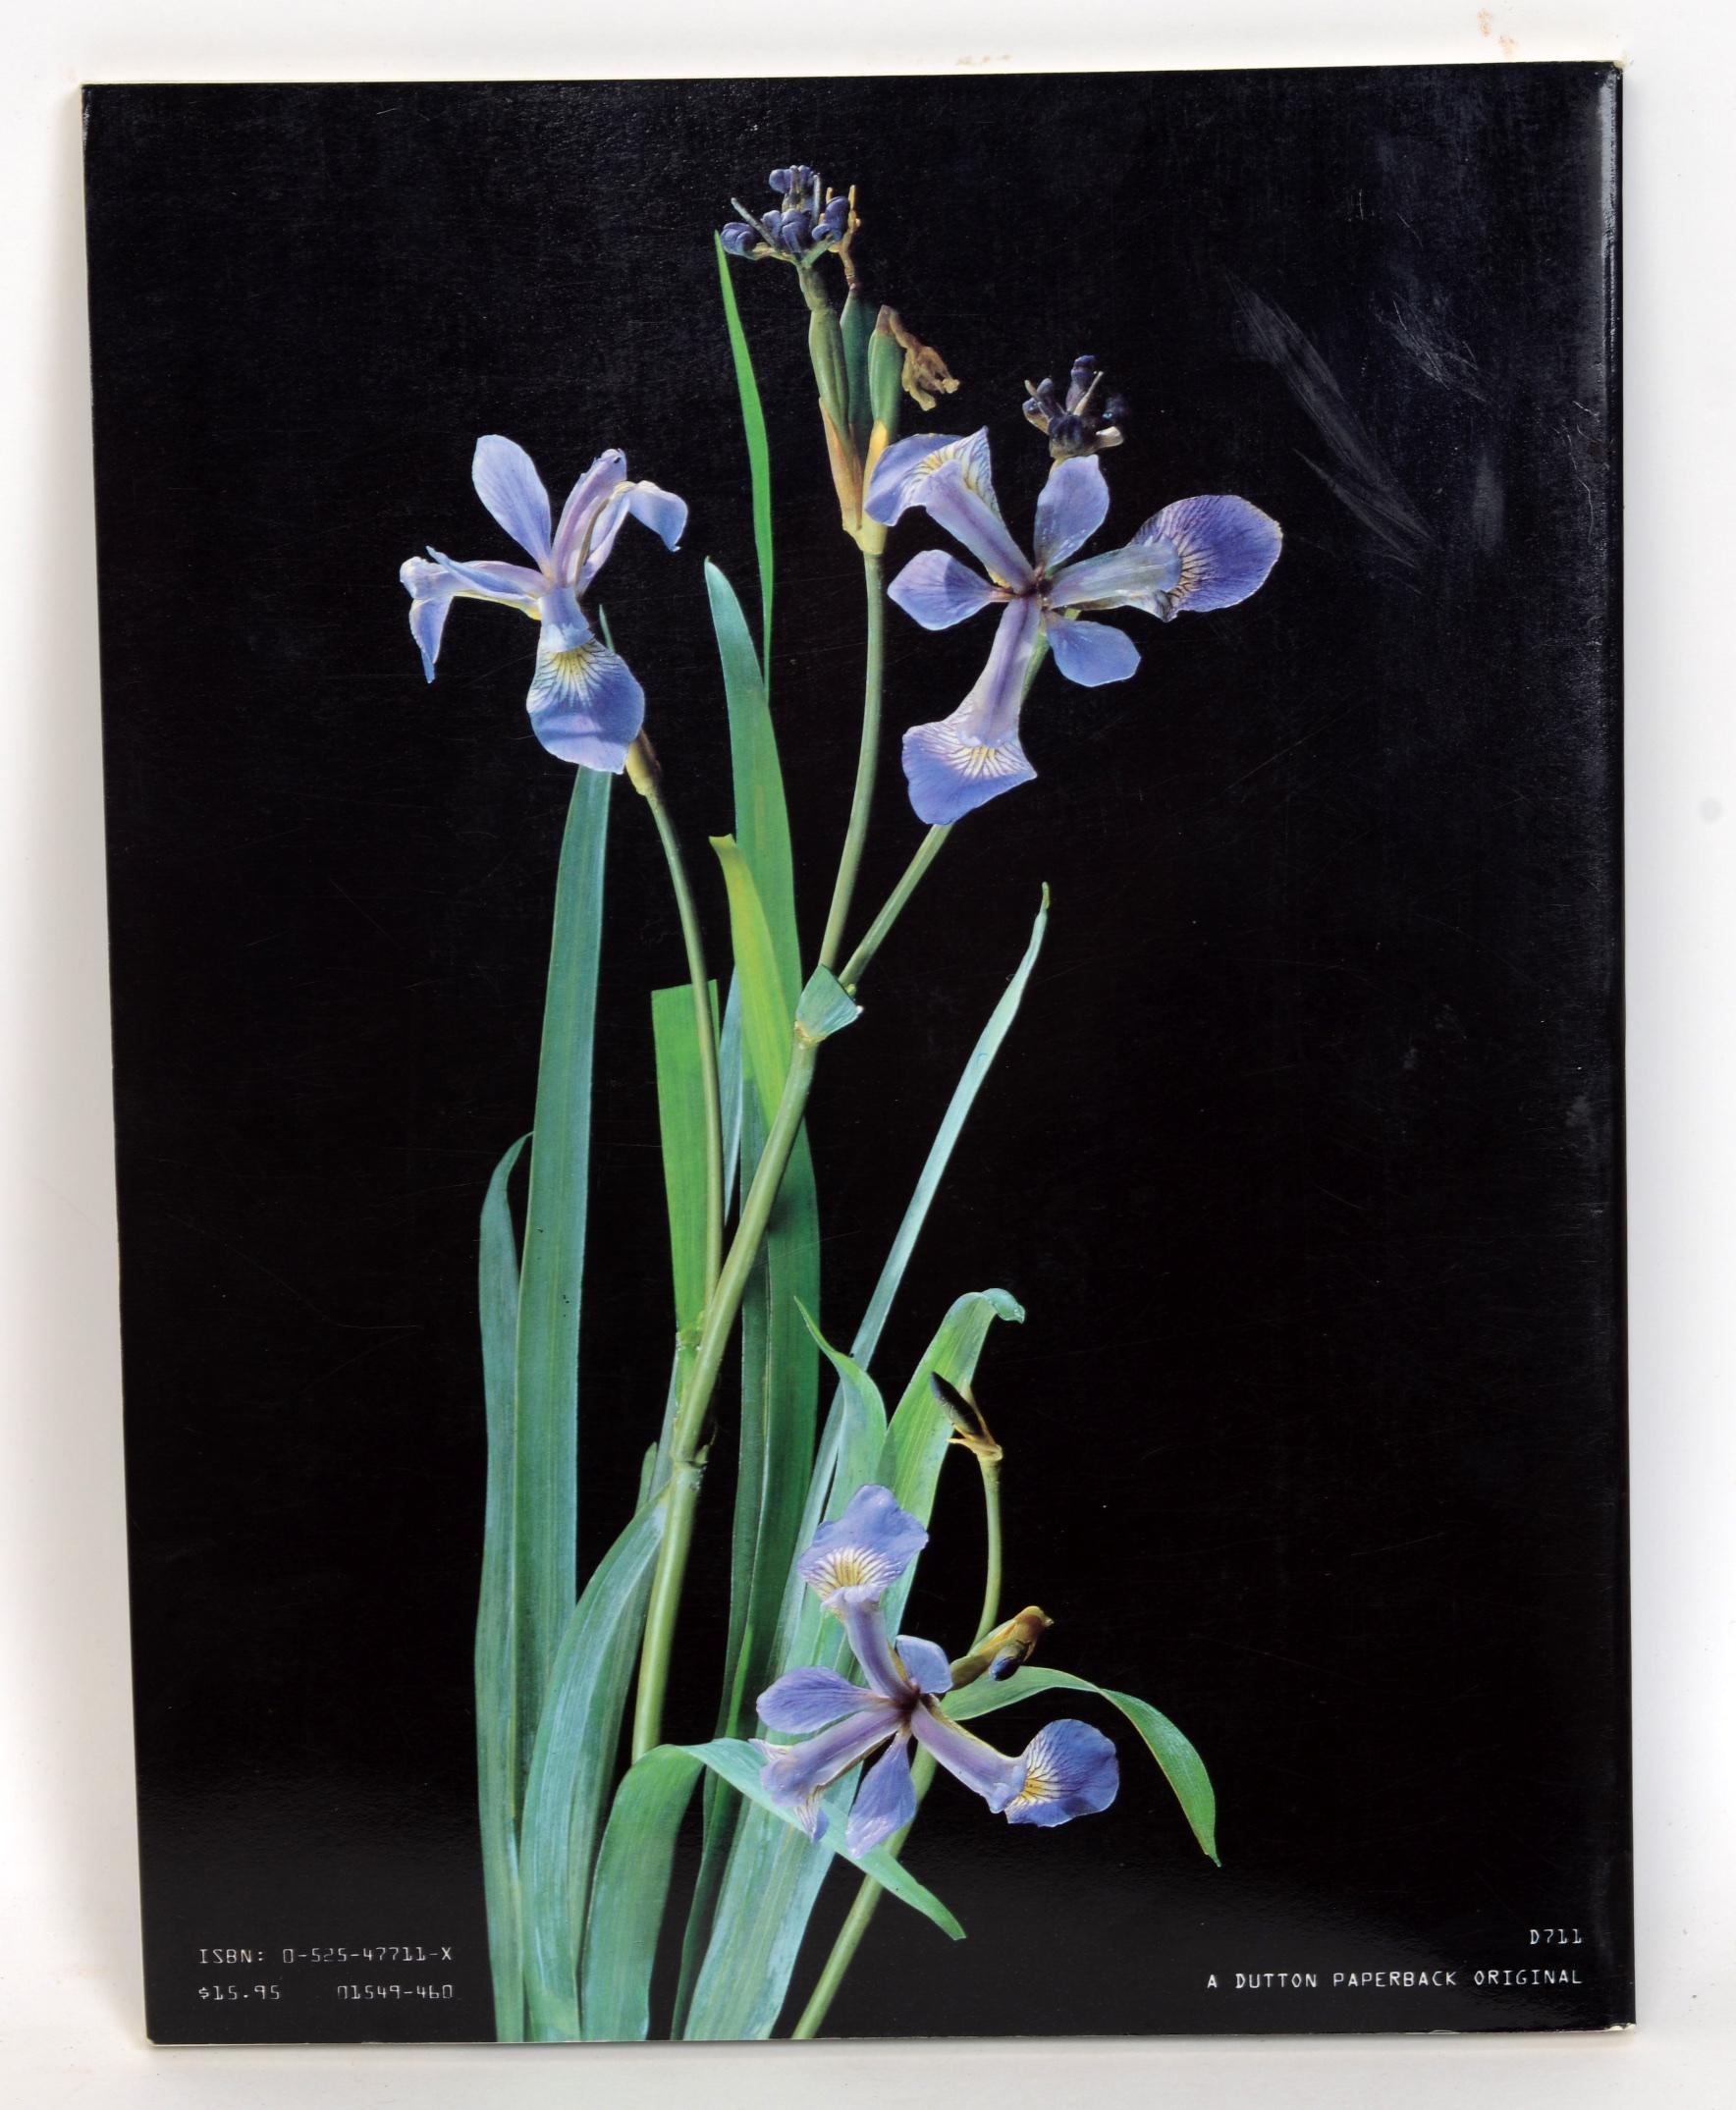 The Glass Flowers at Harvard by Richard Evans Schultes. E. P. Dutton, 1982. Stated 1st Ed paperback. One of Harvard's most famous treasures is the Ware Collection of Blaschka Glass Models of Plants, the “Glass Flowers.